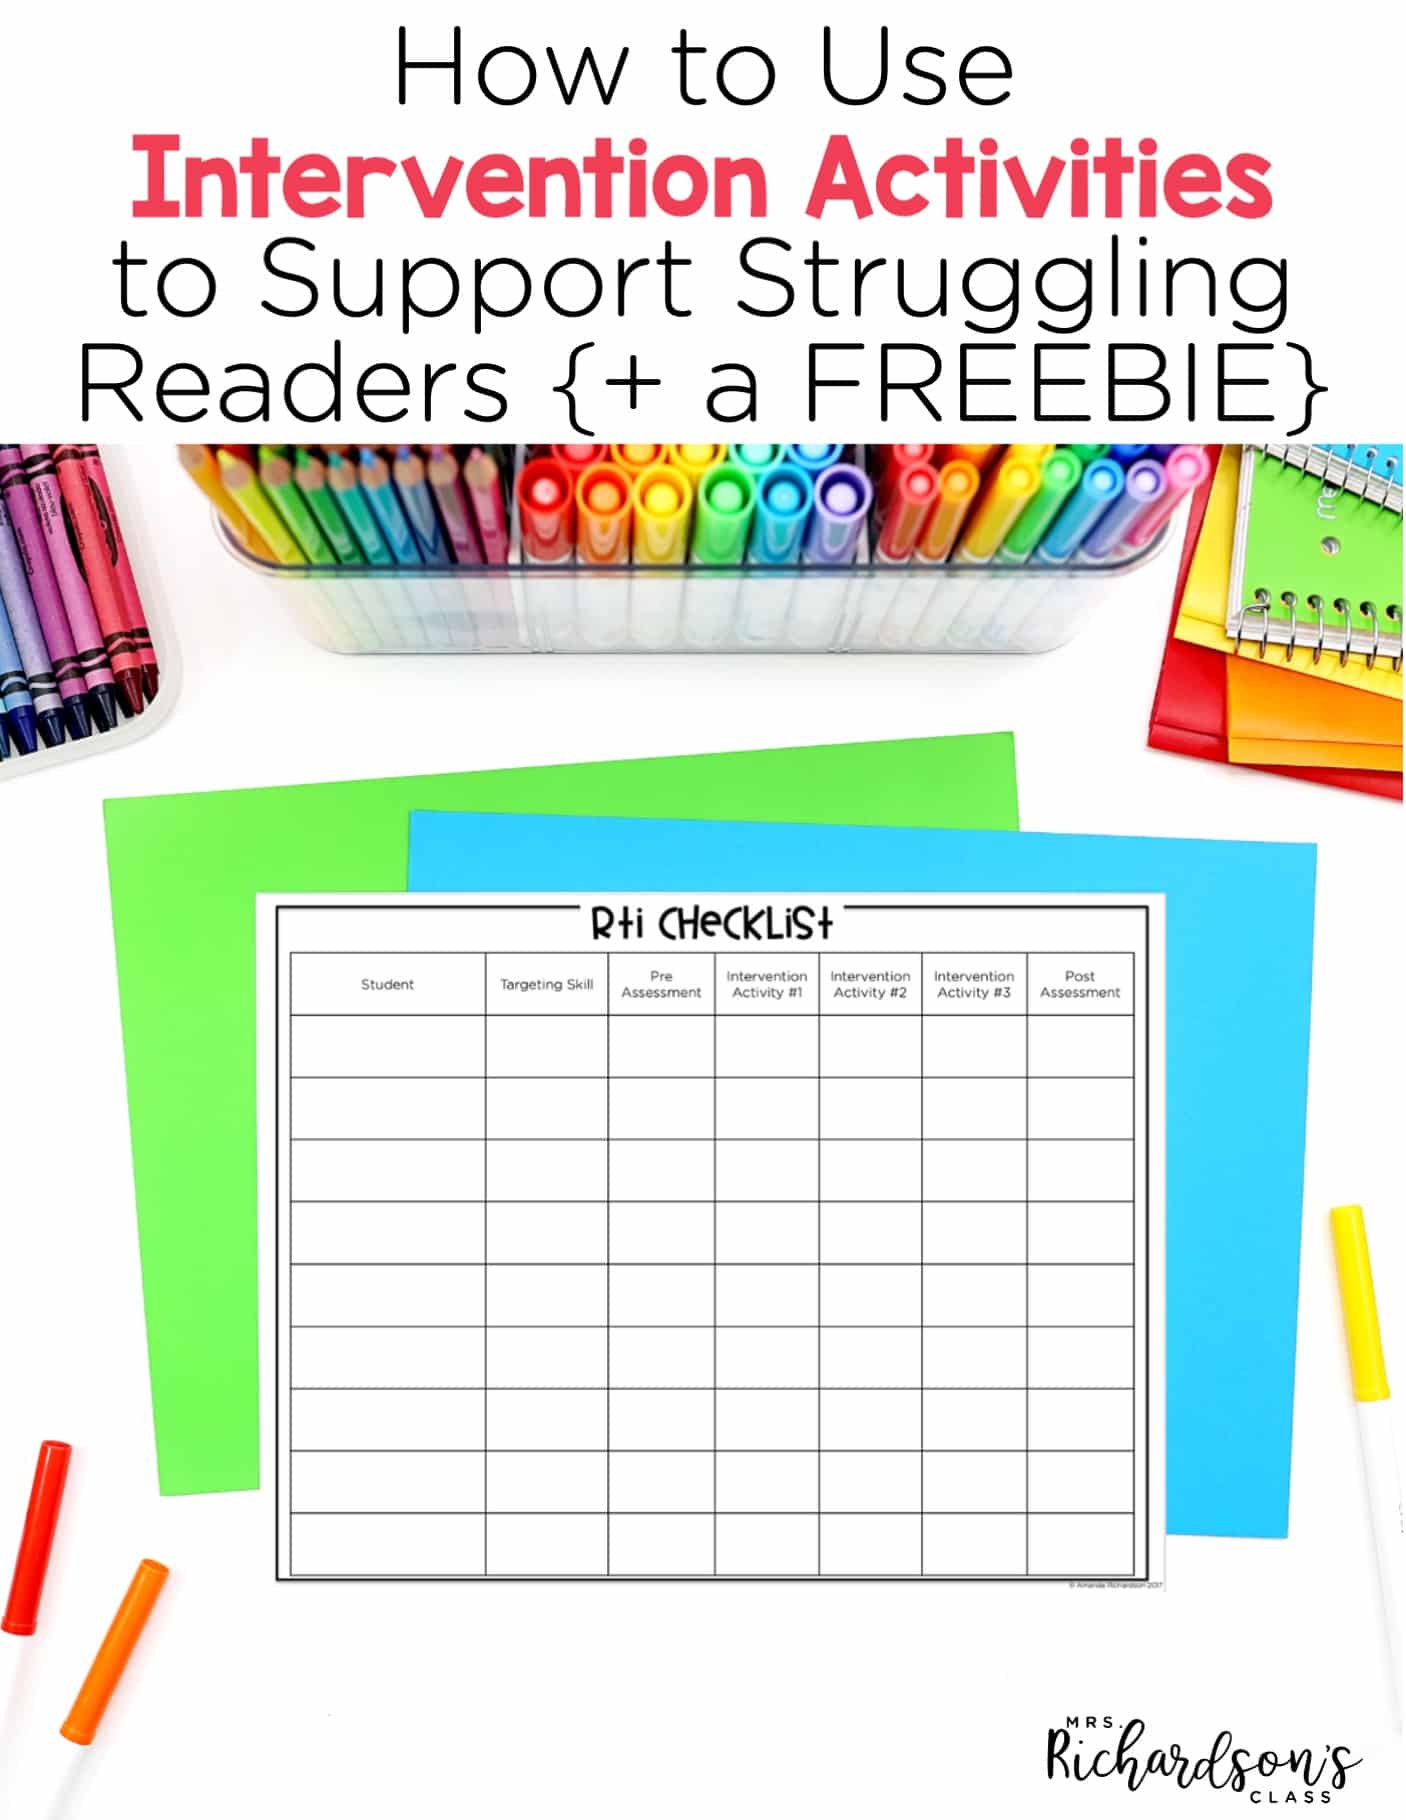 Reading Intervention Resources, Tools & Materials for Struggling